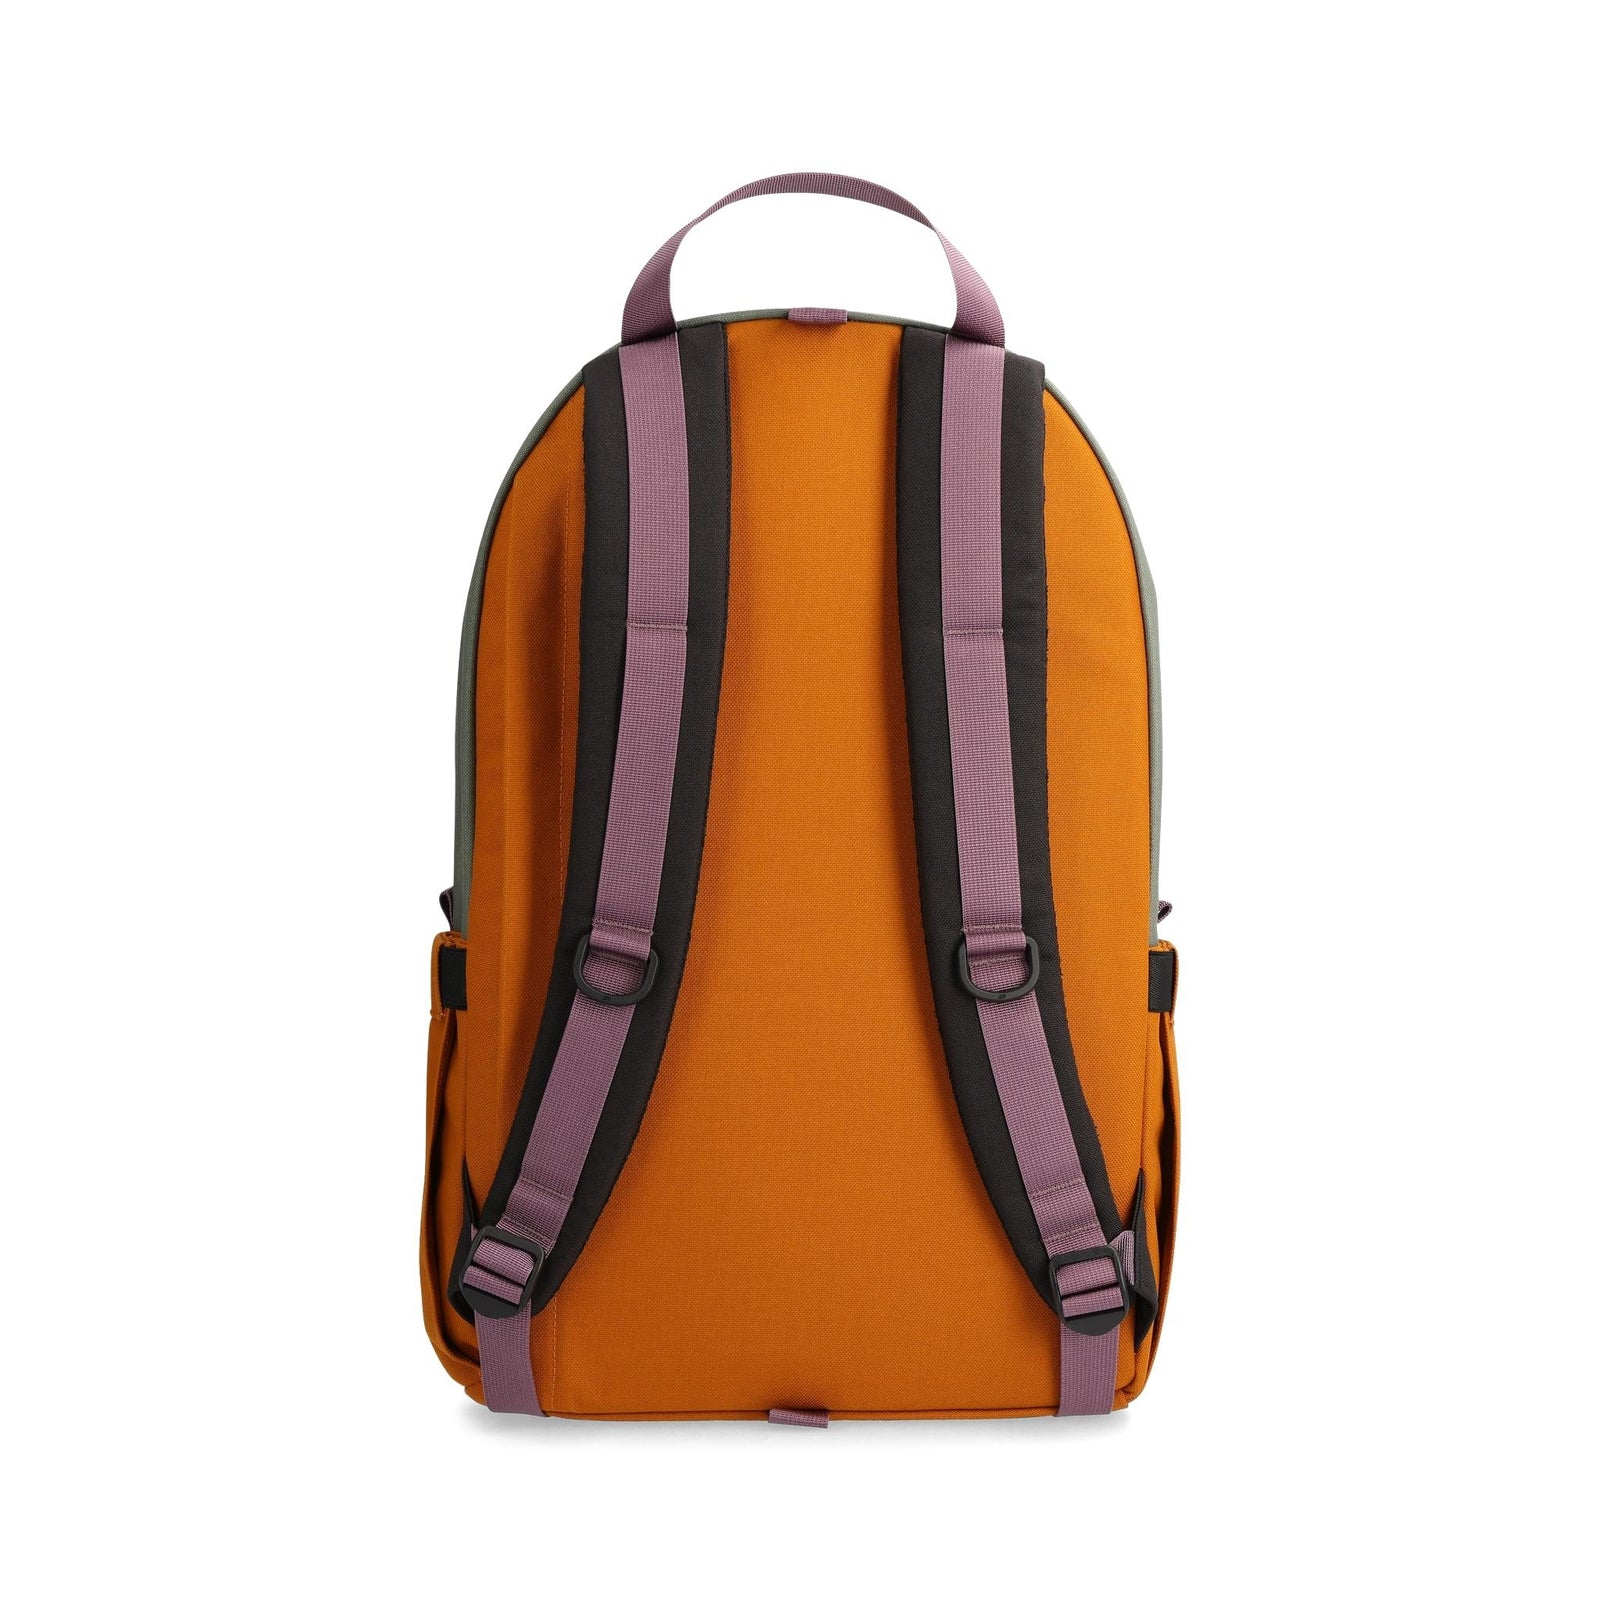 Back View of Topo Designs Daypack Classic in "Beetle / Spice"